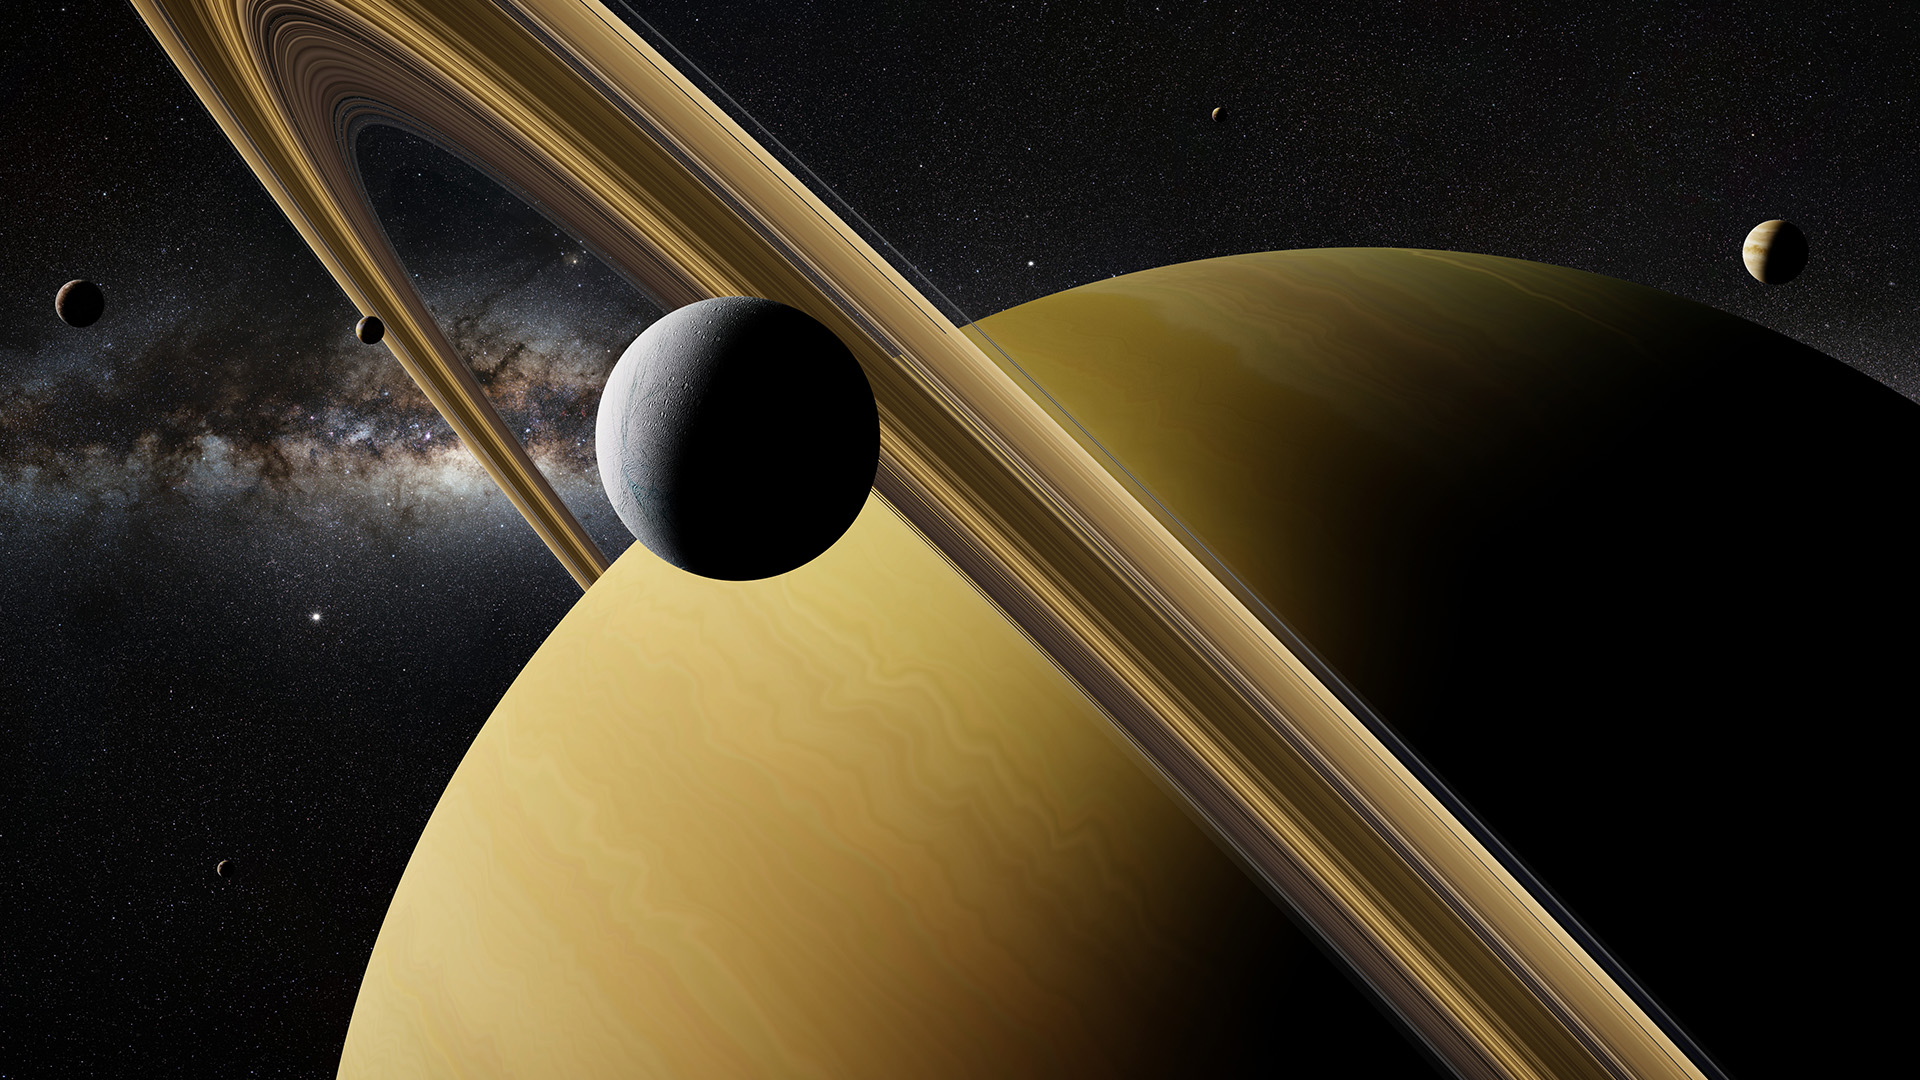 Saturn moon Enceladus in front of planet Saturn, rings and other moons.